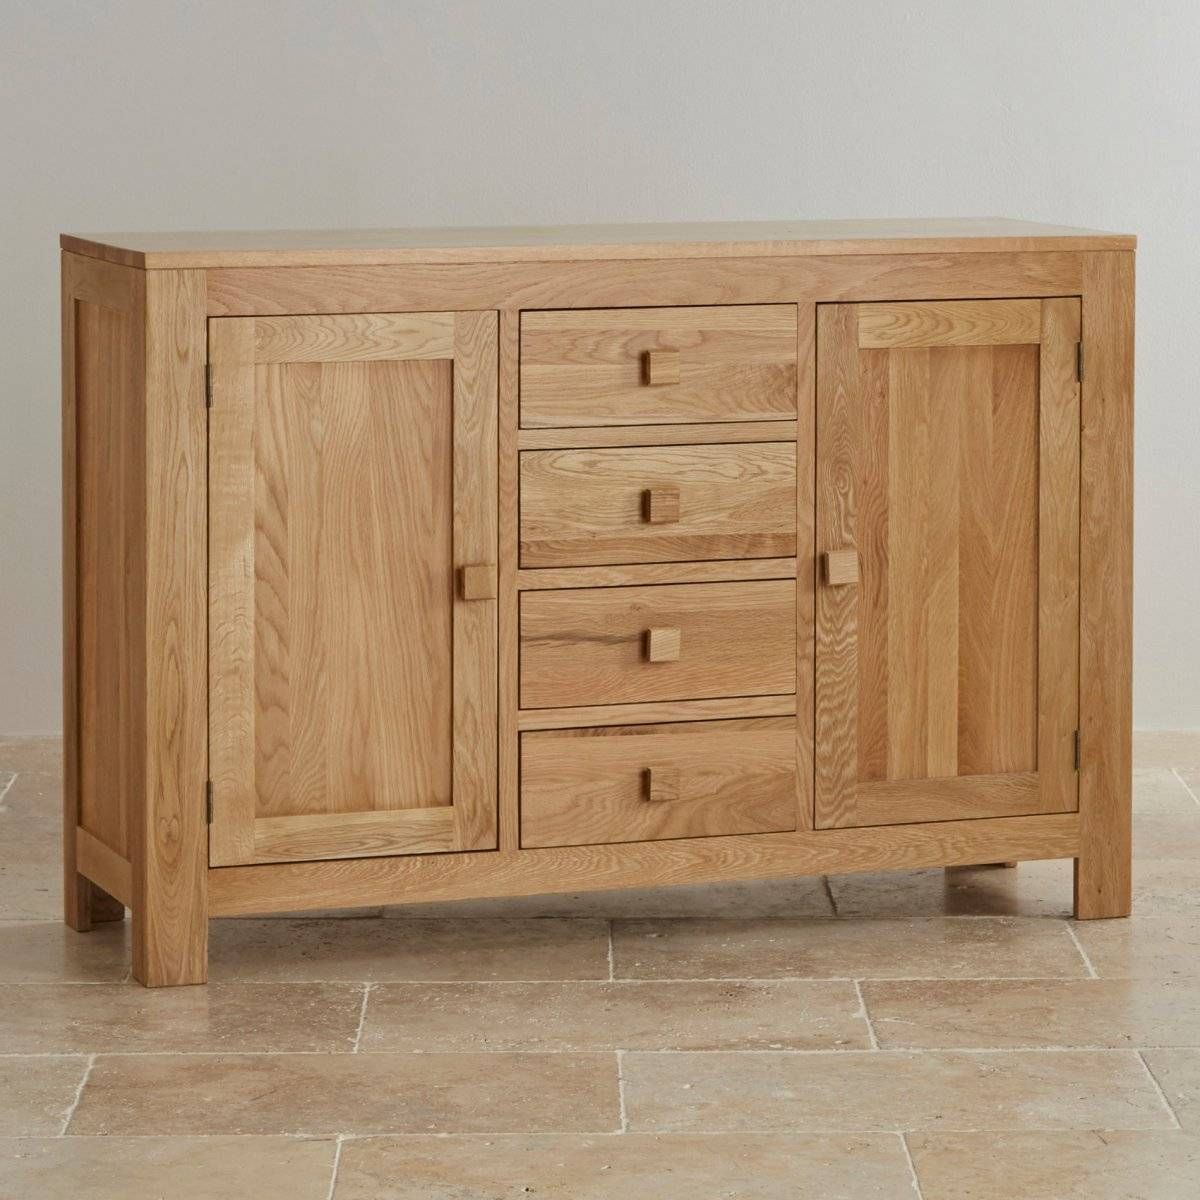 Sideboards | 100% Solid Hardwood | Oak Furniture Land With Real Wood Sideboards (View 17 of 30)